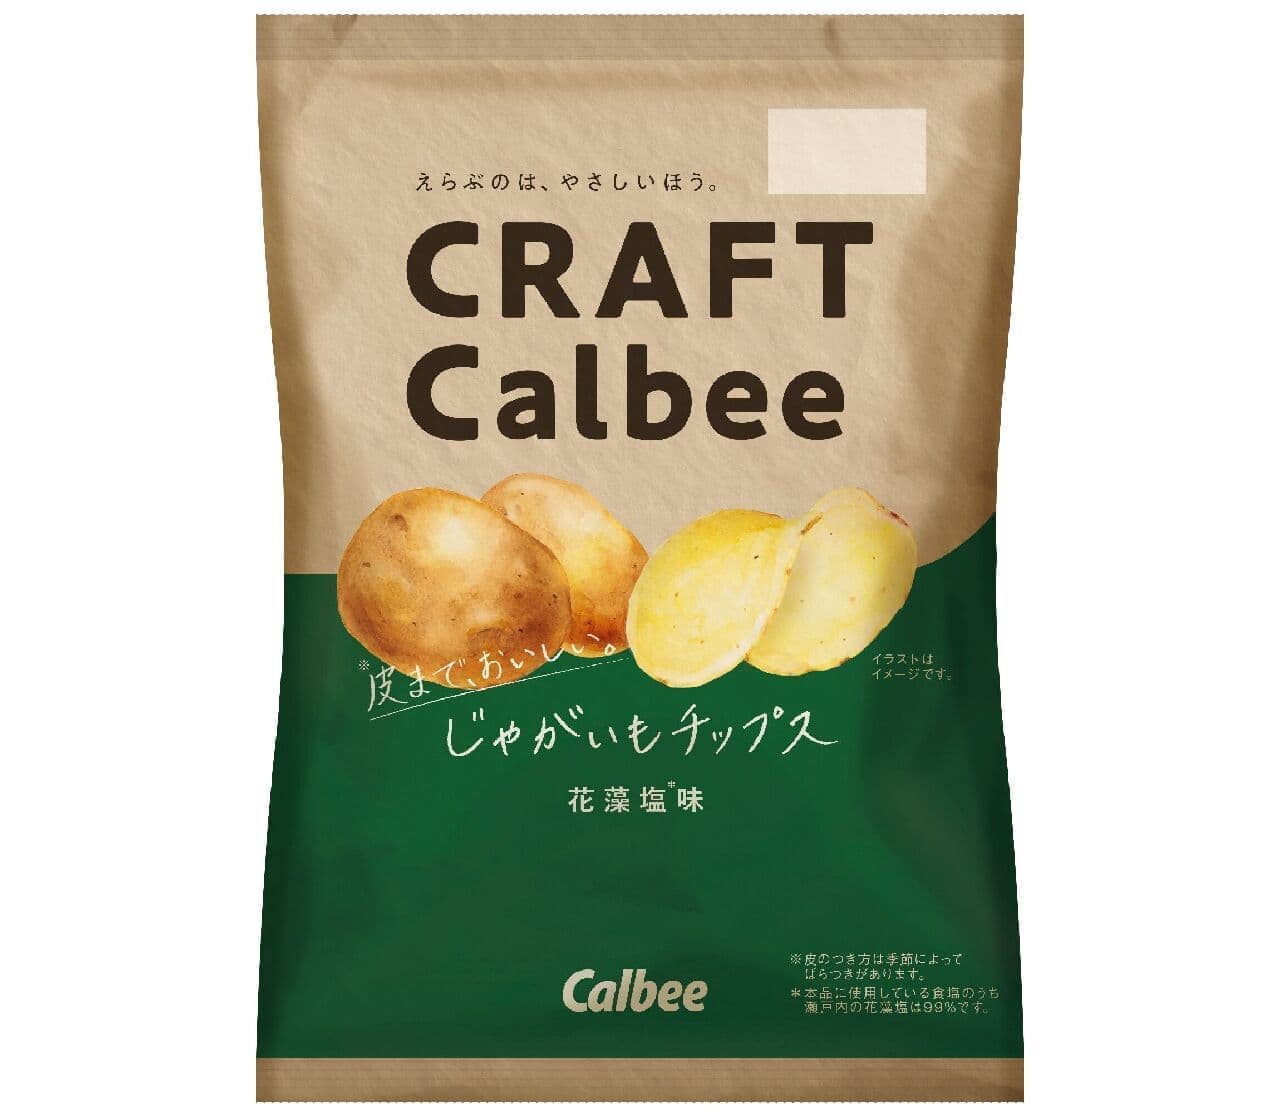 Even The Skin Is Delicious Potato Chips Flower Algae Salt Flavor Potato Chips Smoked Cheese Flavor Calbee S First Potato Chips With Skin Entabe Com